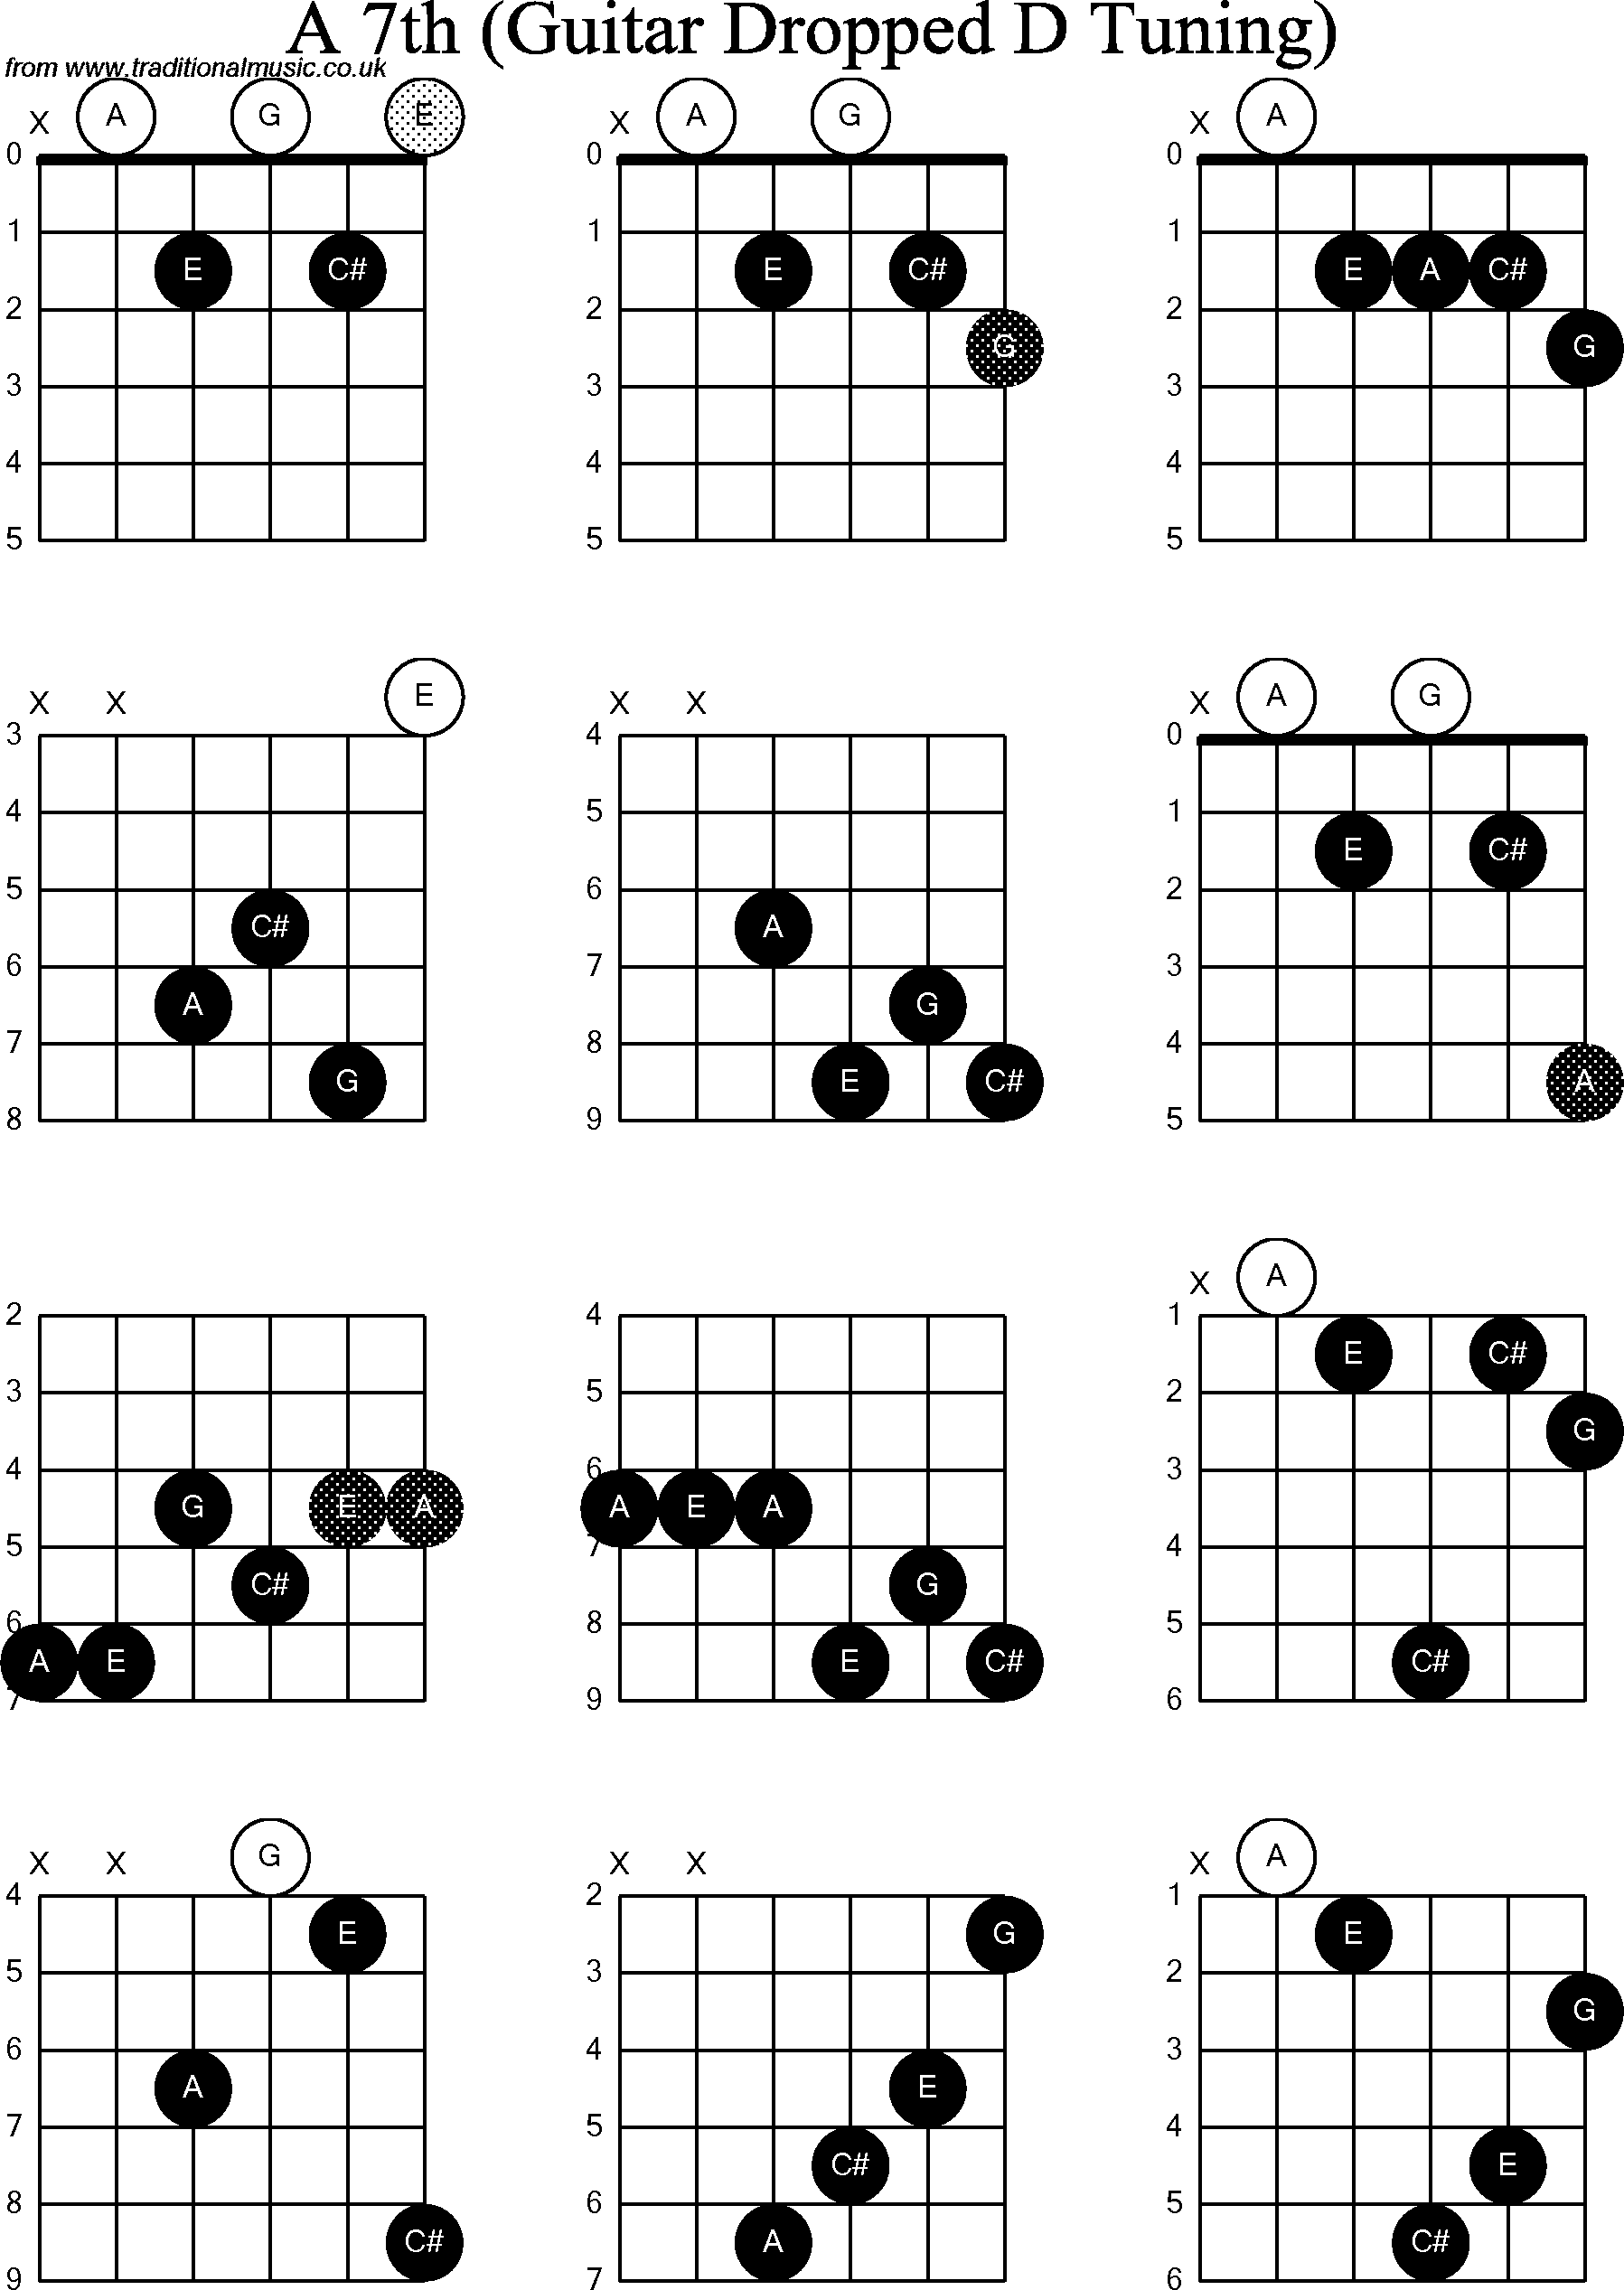 Chord diagrams for Dropped D Guitar(DADGBE), D Minor